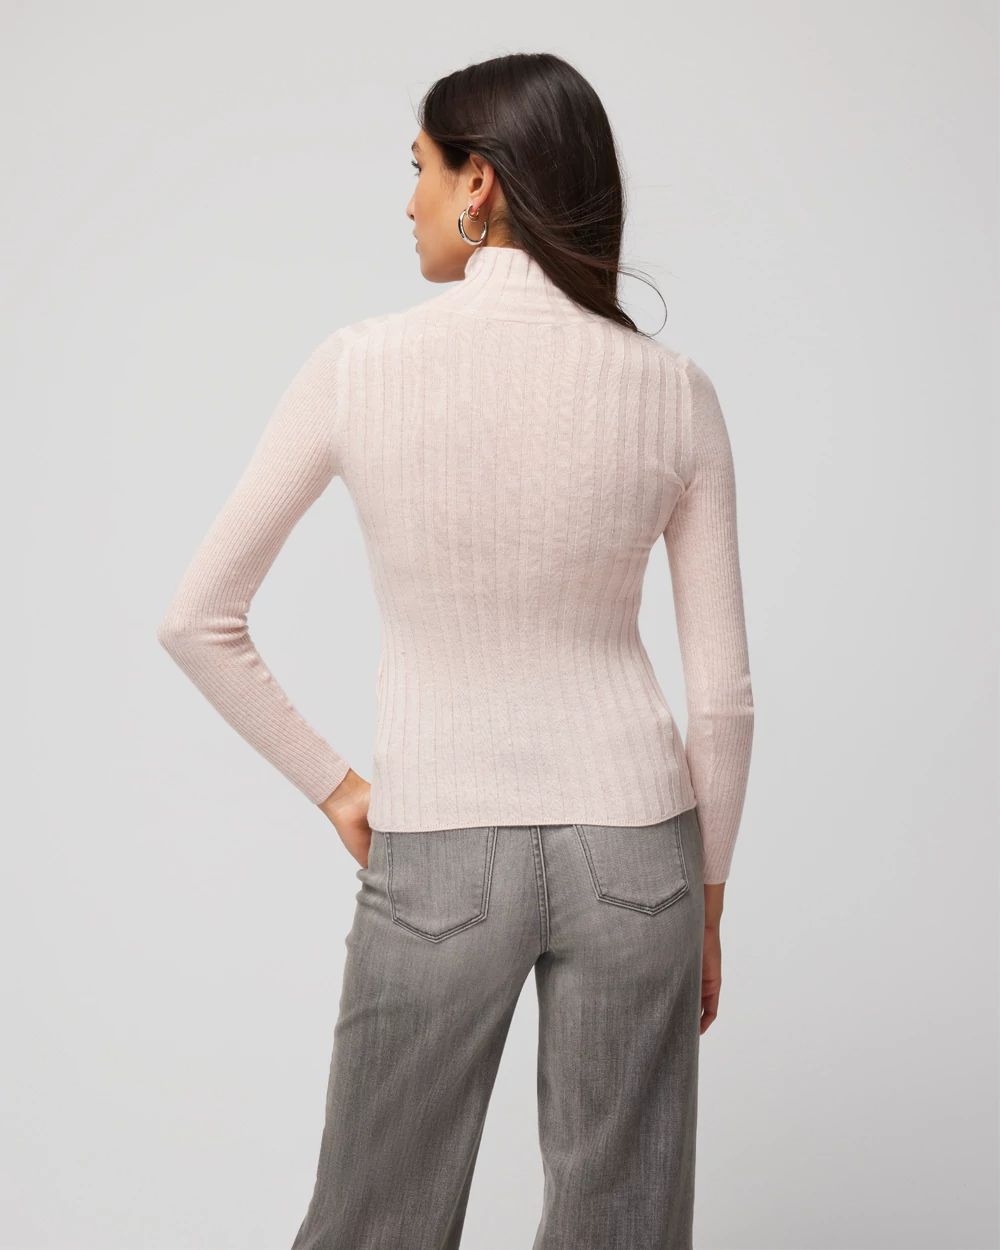 Petite Long-Sleeve Cashmere Blend Mockneck Sweater click to view larger image.